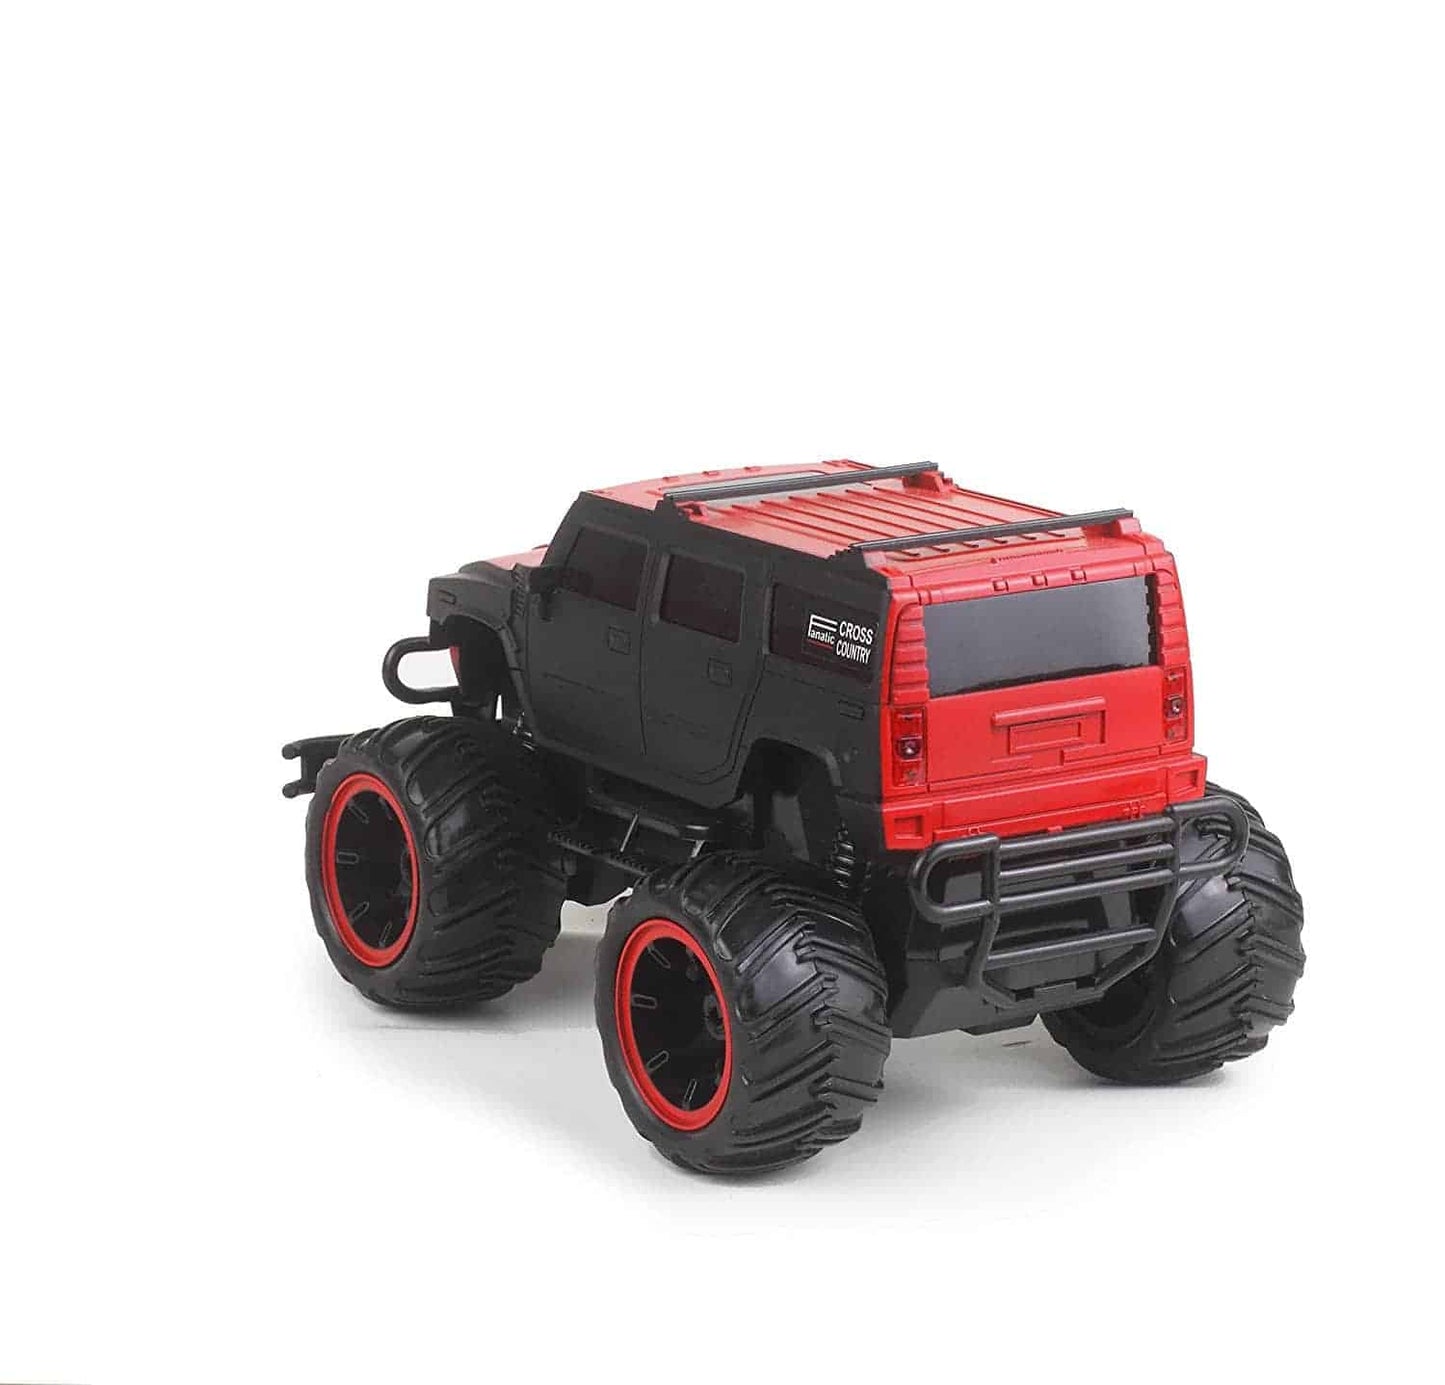 The Flyers Bay 1:20 Bay Big and Mean Rock Crawling Scale Modified Hummer( Assorted Color)